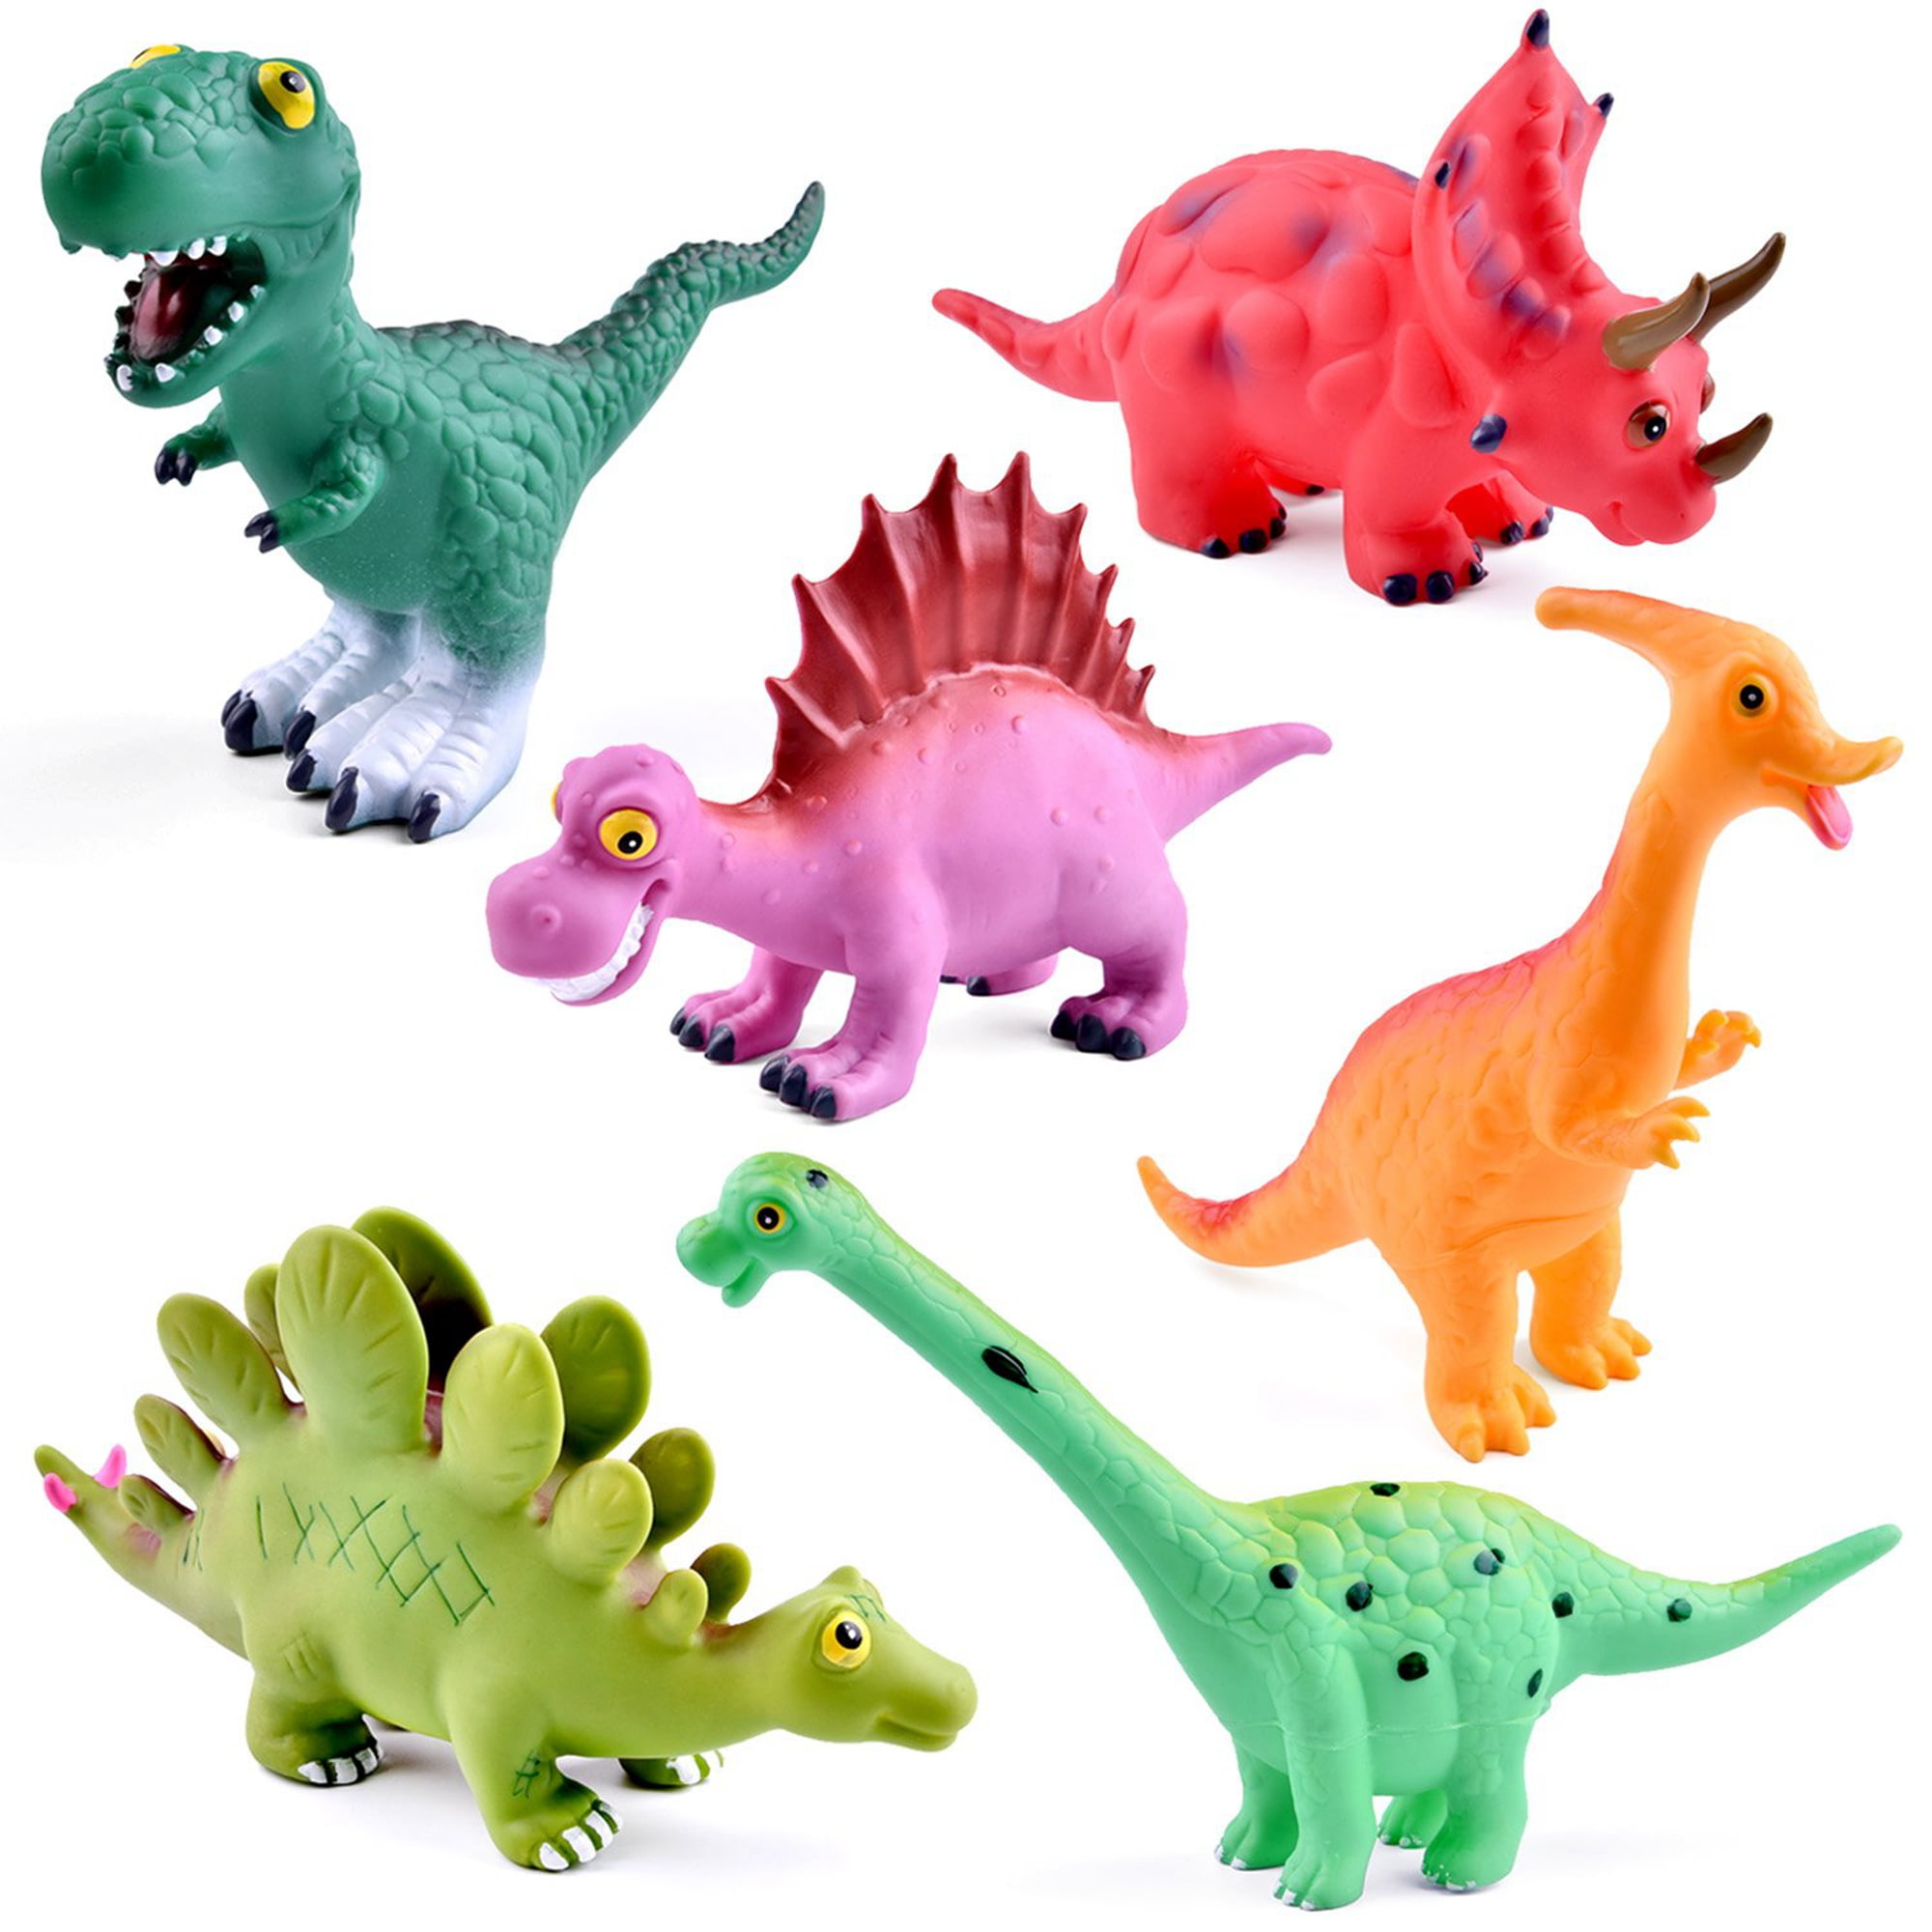 Bath Toys for Toddlers, Dinosaur Figures Playset, Water Squirt Toys, Baby Bathtub Toys F-197